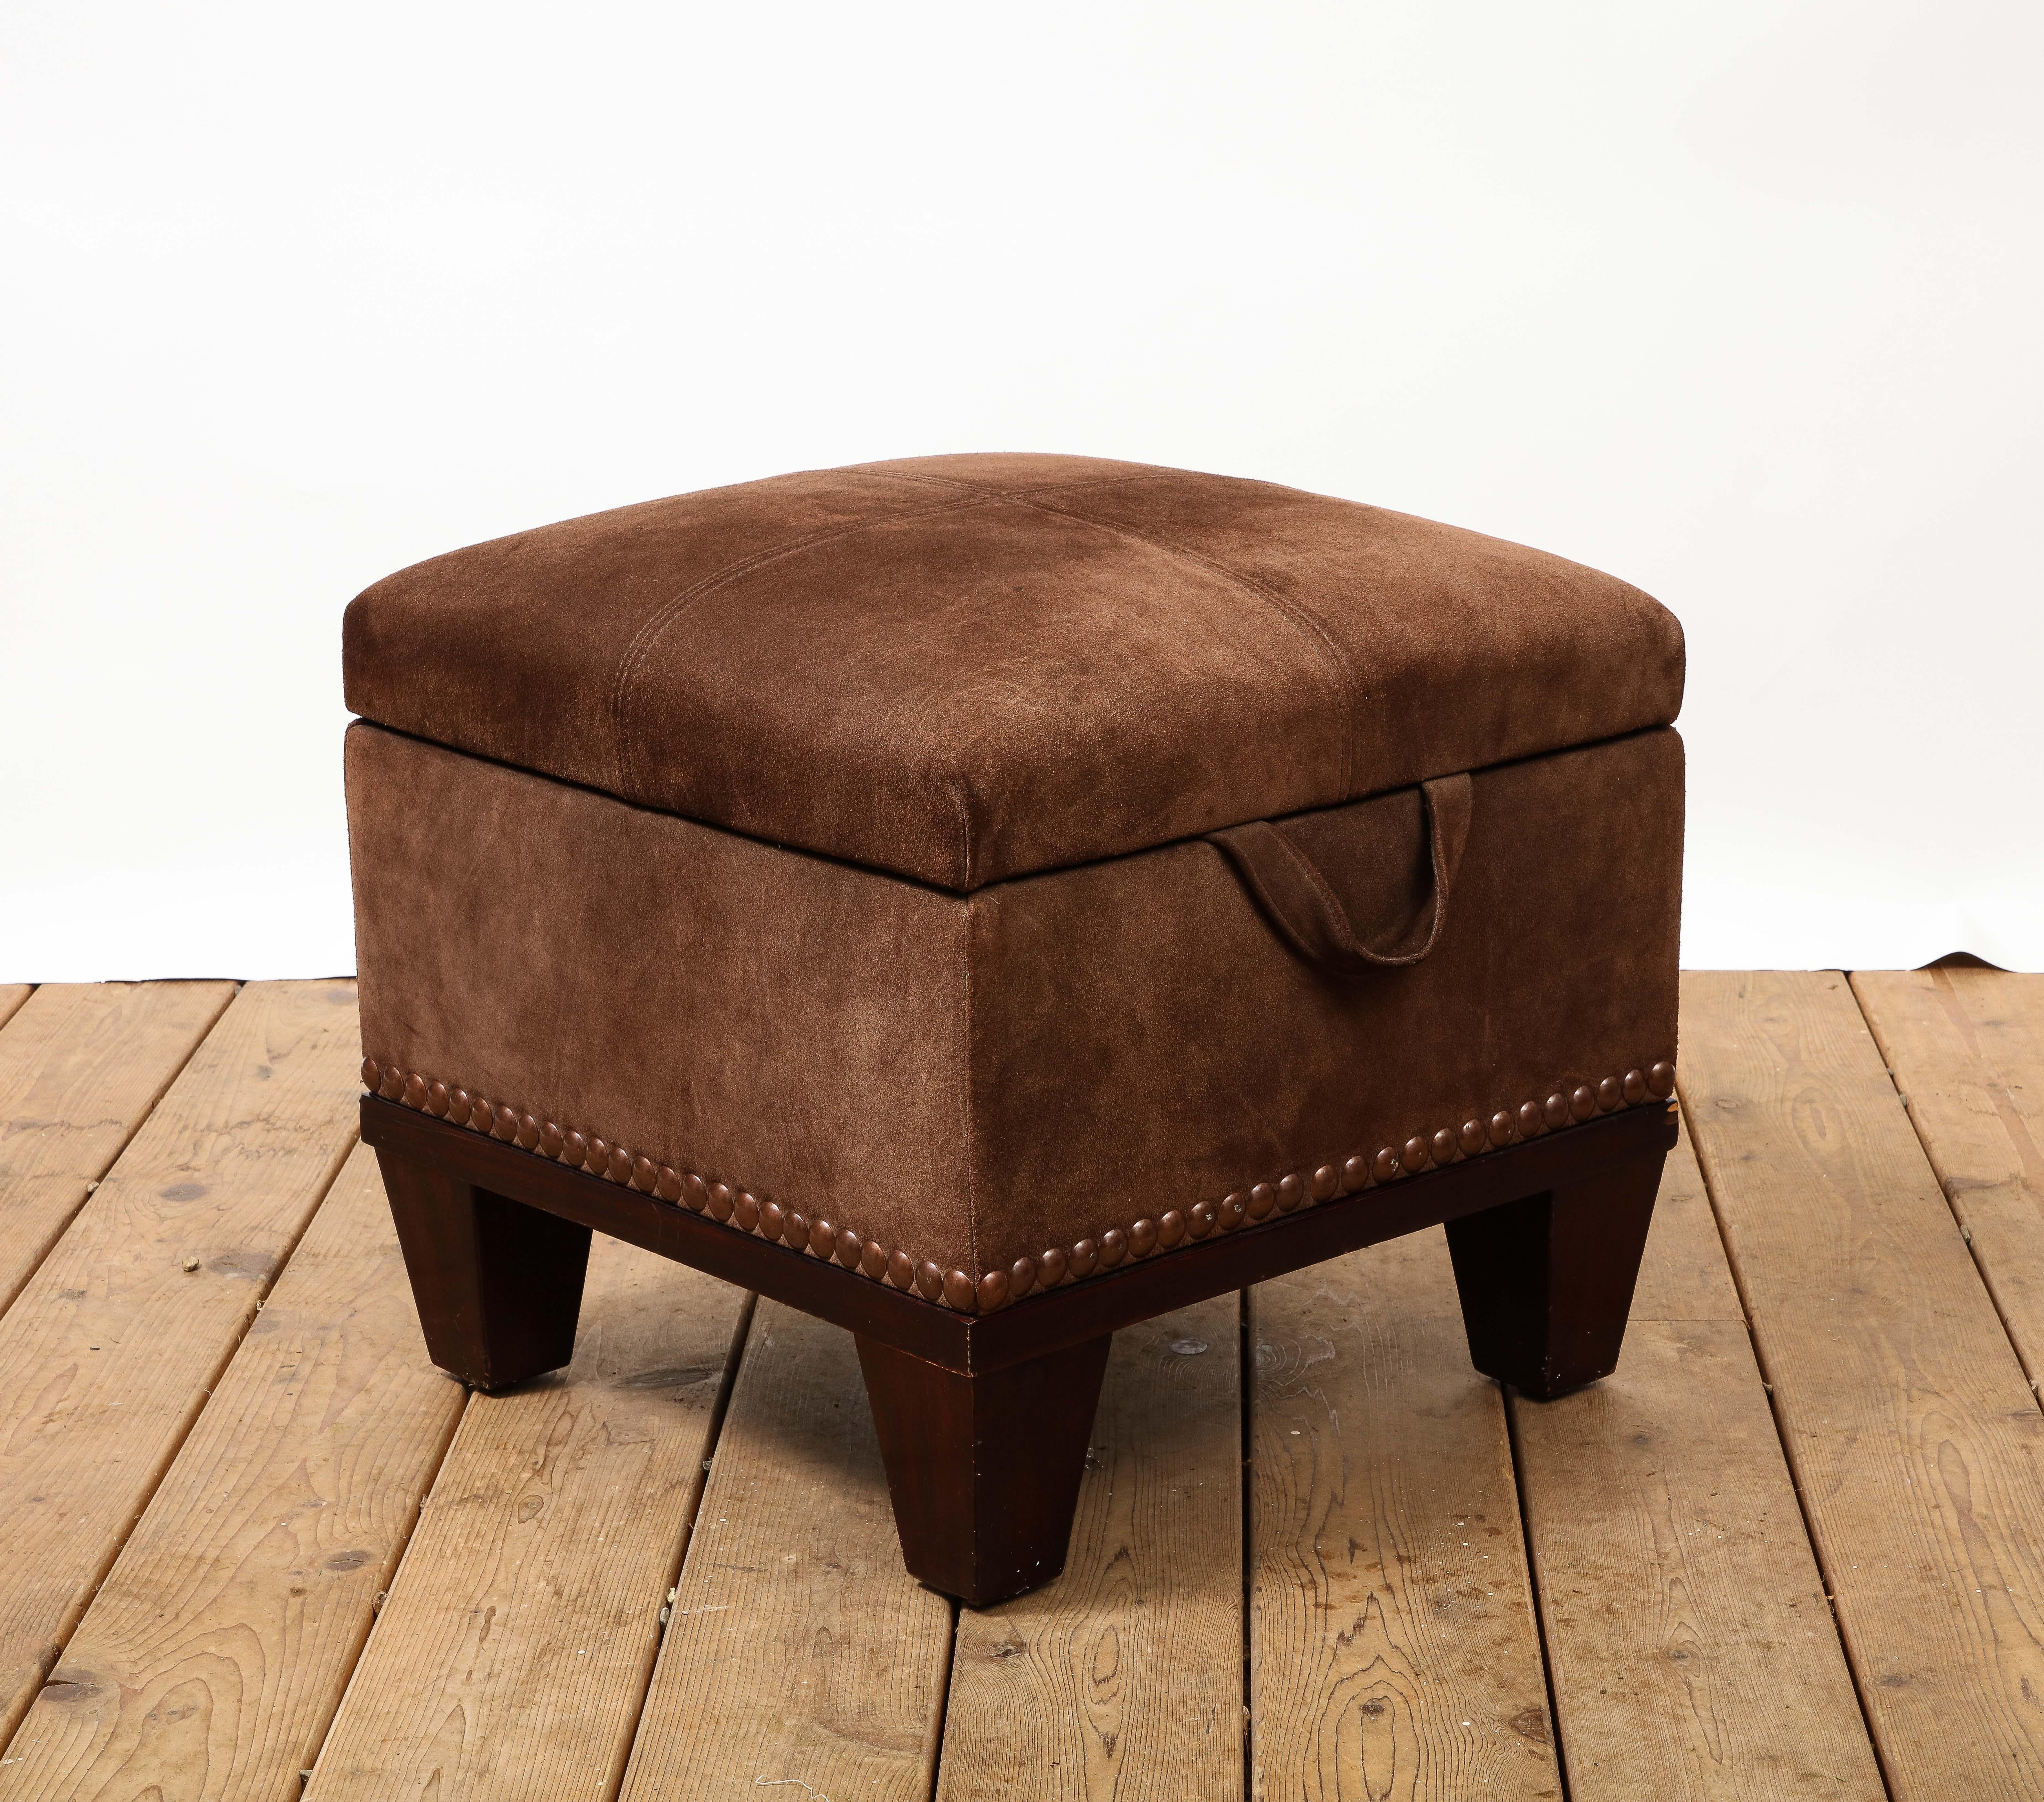 brown suede ottoman with storage